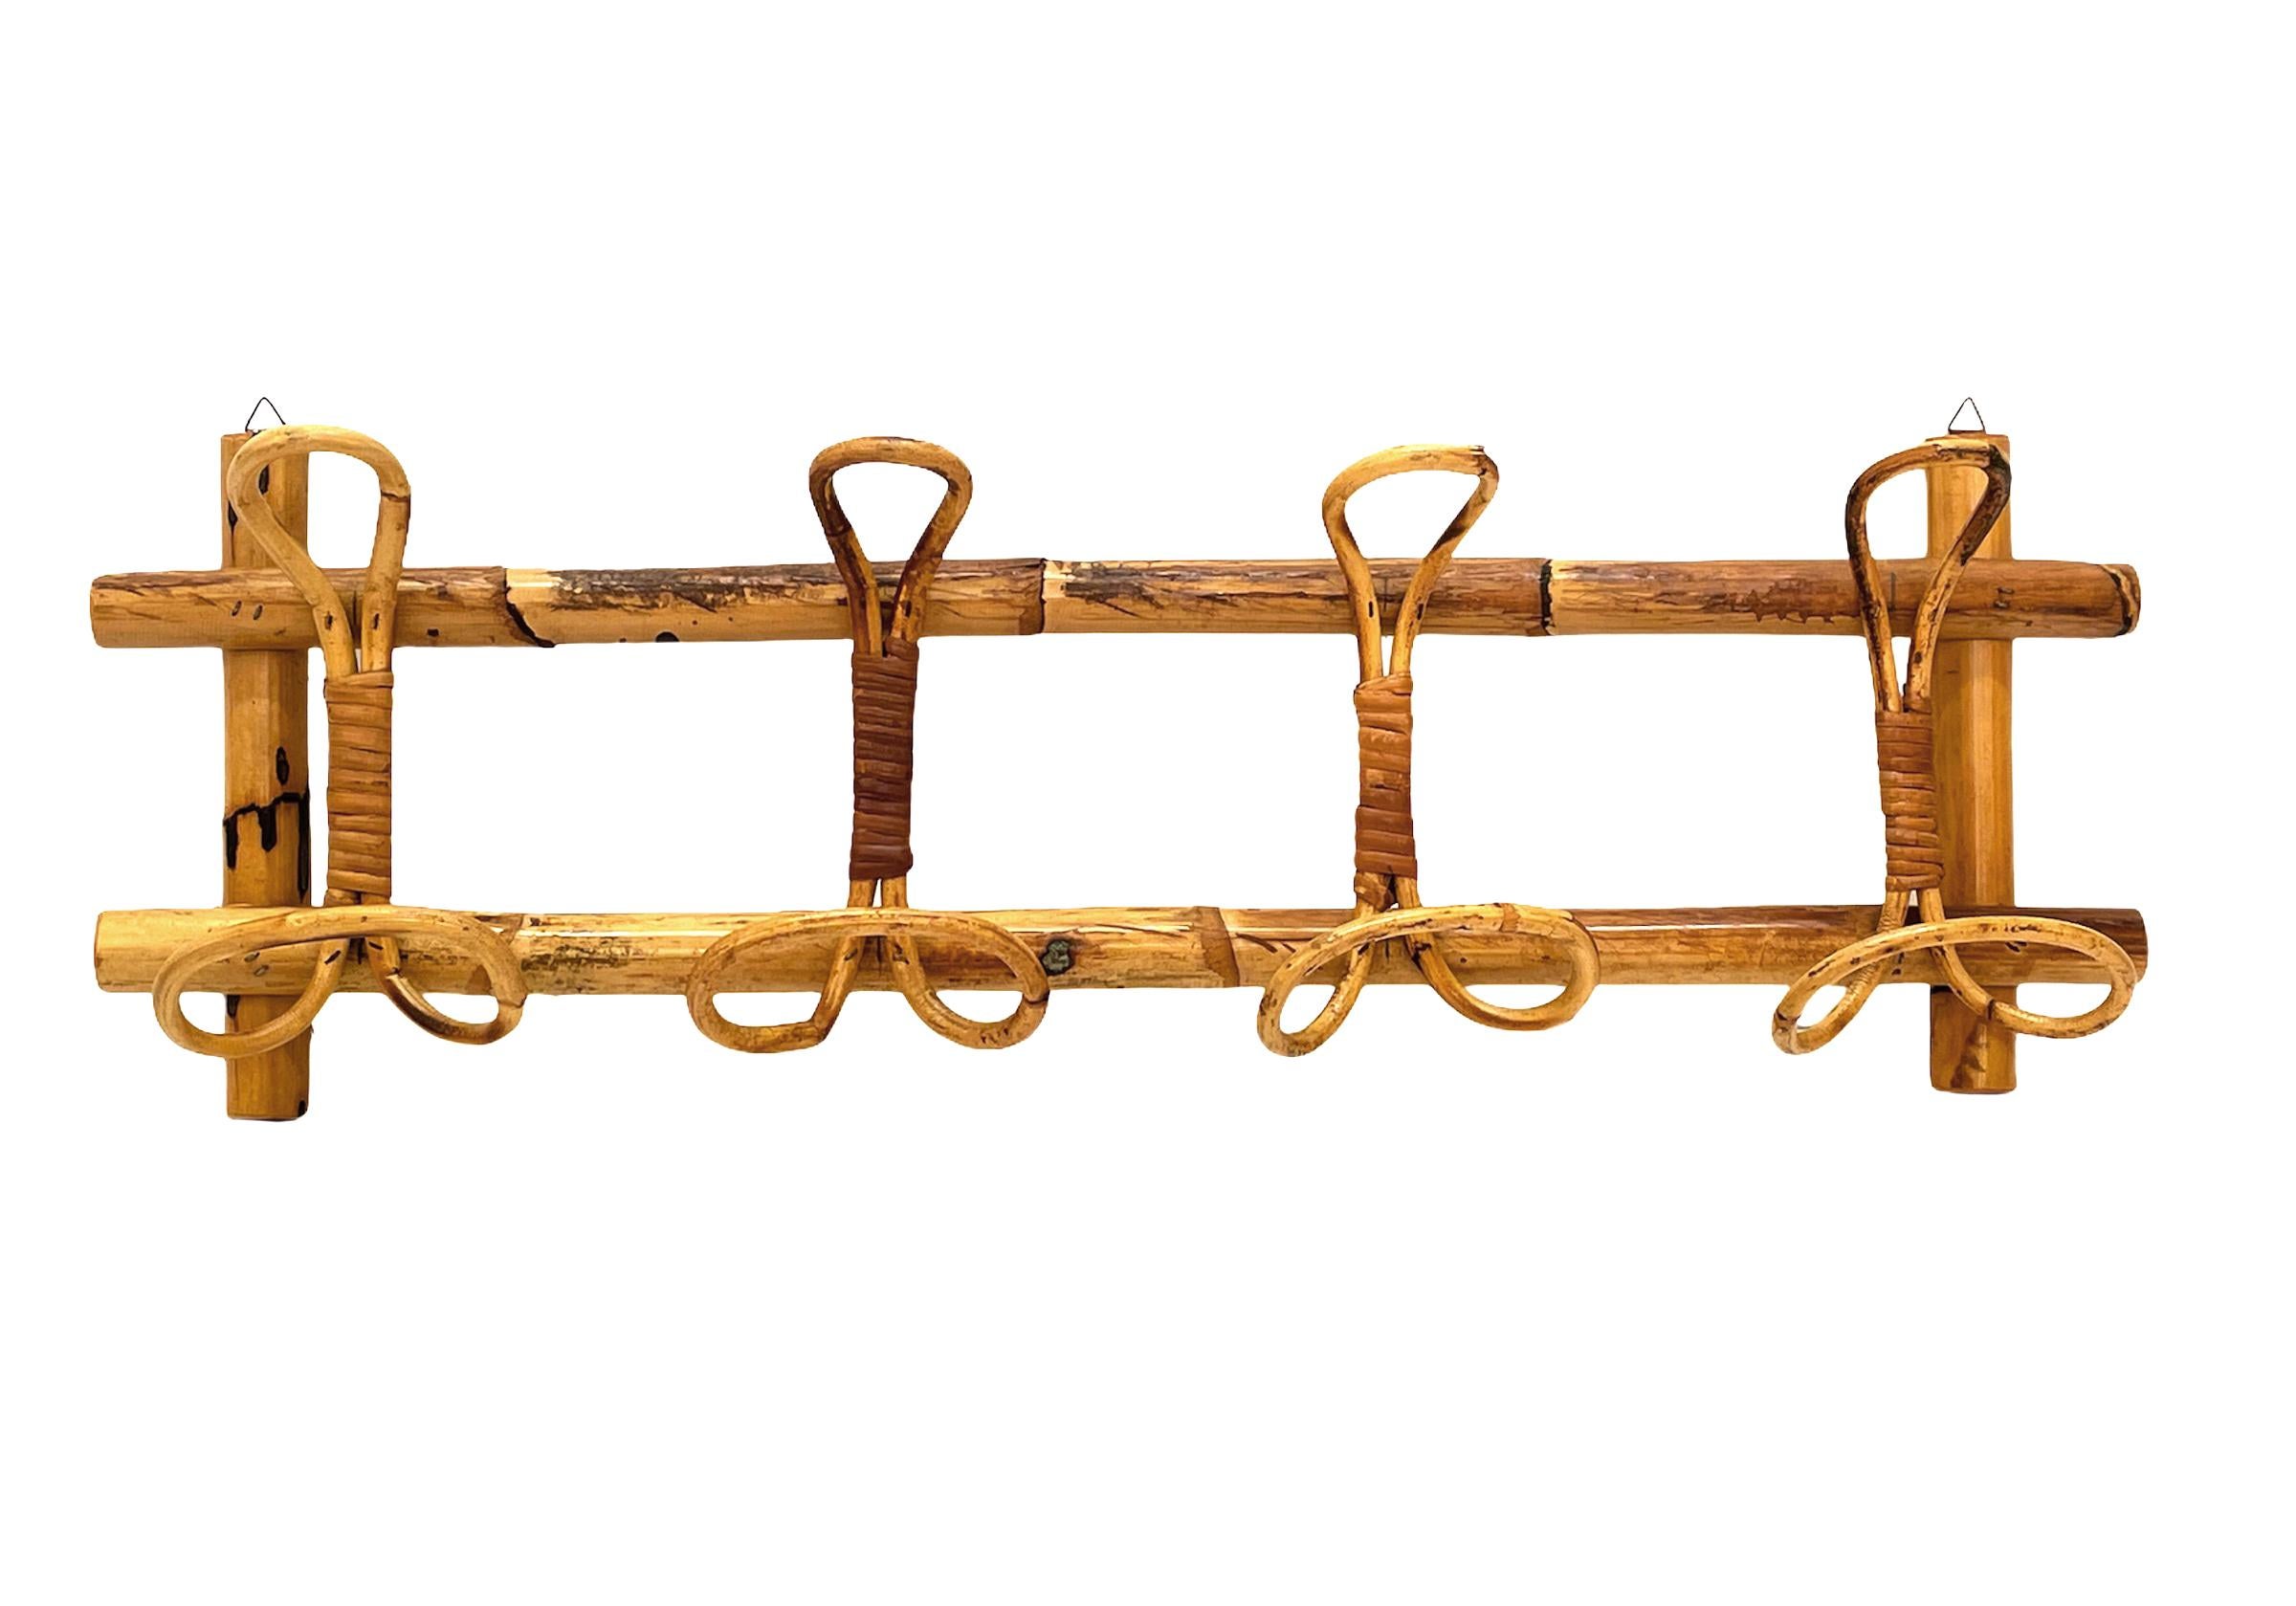 Amazing French Riviera midcentury rattan and bamboo coat hanger. This wonderful piece was made in Italy during the 1960s.

This unique item features a structure in bamboo canes and four rattan upper hooks and lower hooks for hanging coats.

The